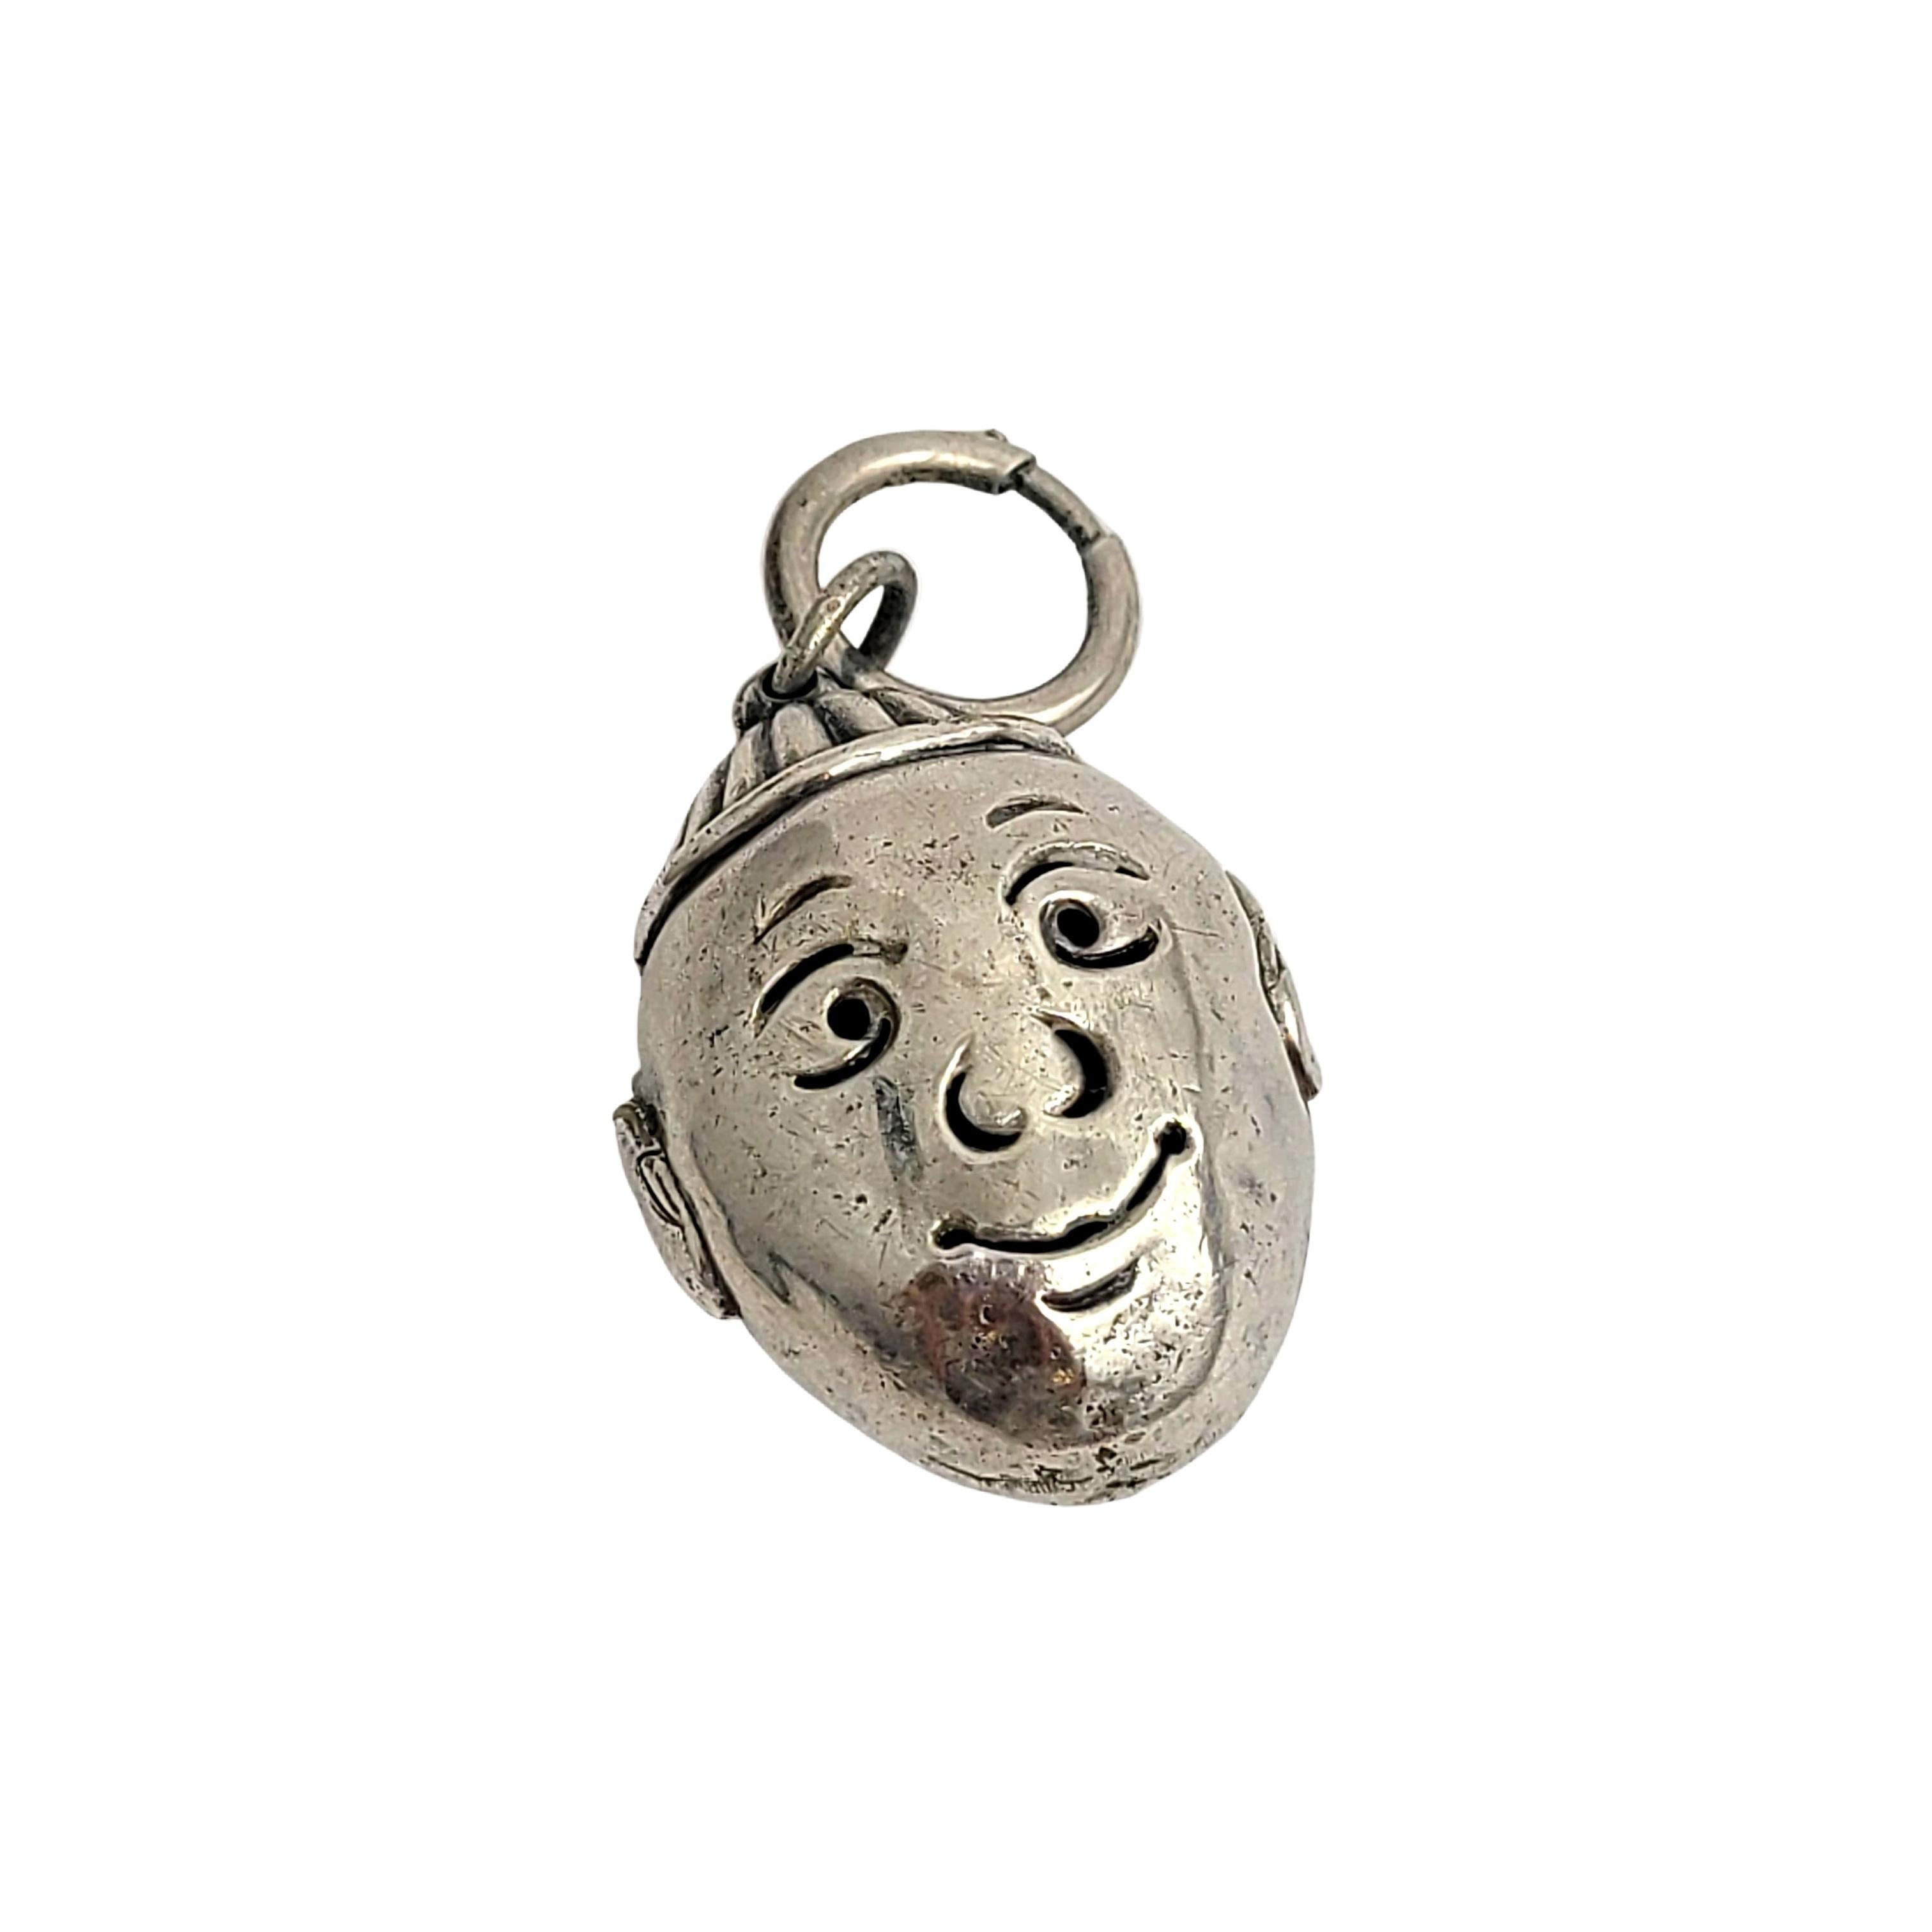 Silver rattle/bell  boy charm.

This is a charming silver little boy's face charm rattle or bell. It has a soft sweet jingle when you shake it. Large clasp to attach the charm.

Measures approx 1 5/8